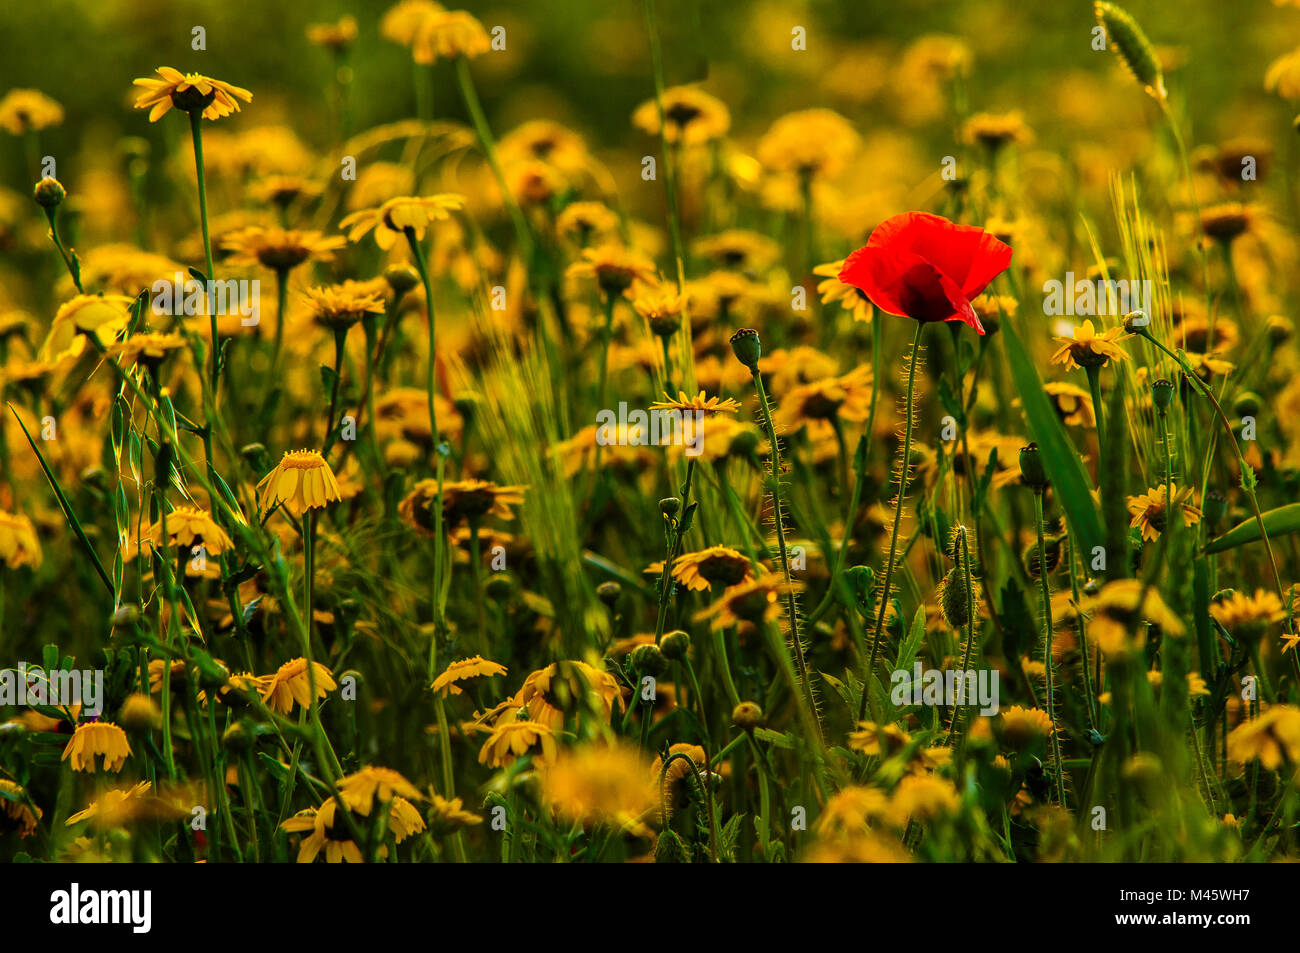 A field of poppies and yellow flowers Stock Photo